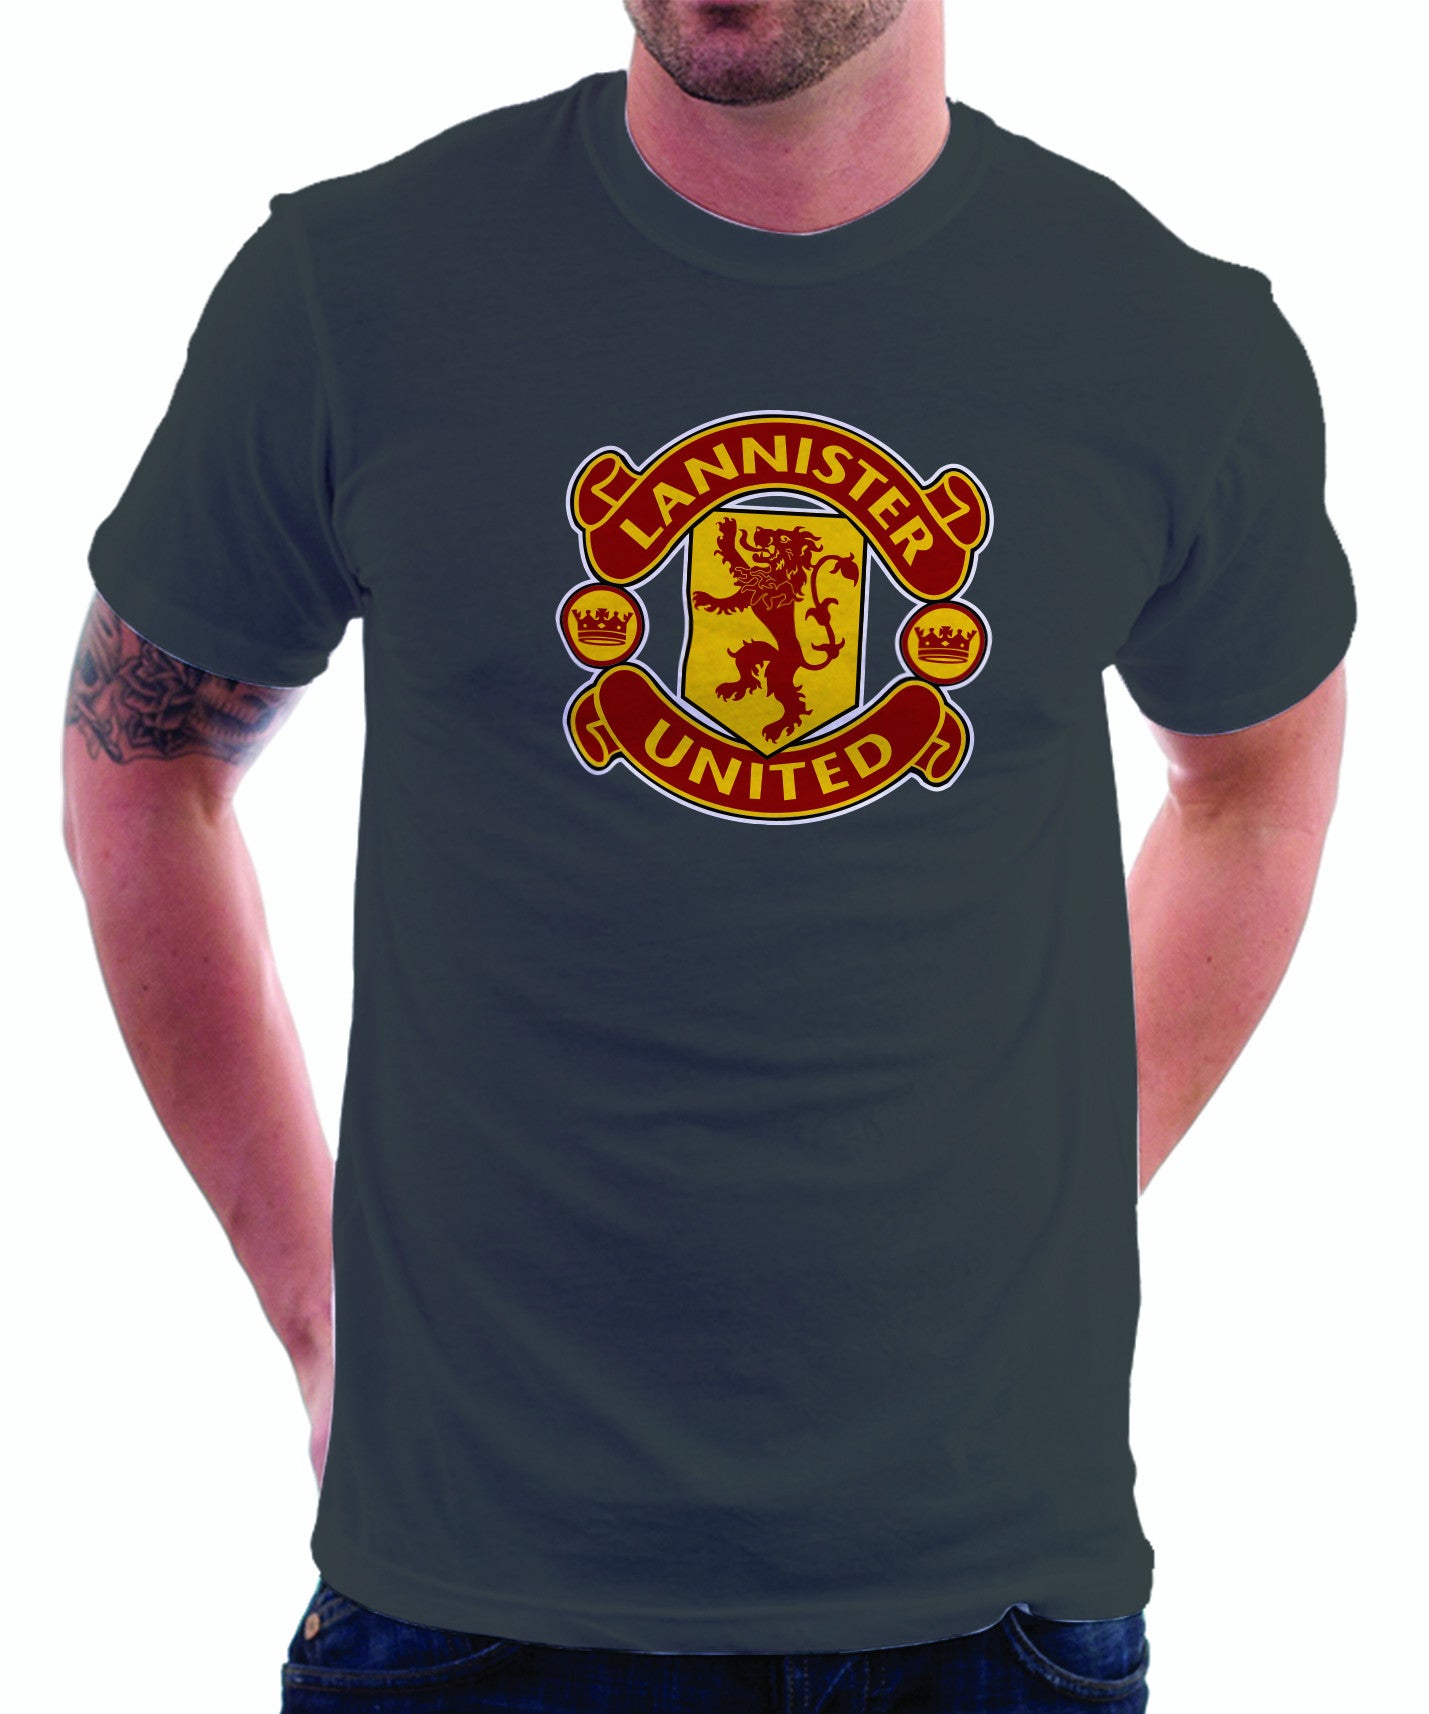 limited edition manchester united shirt